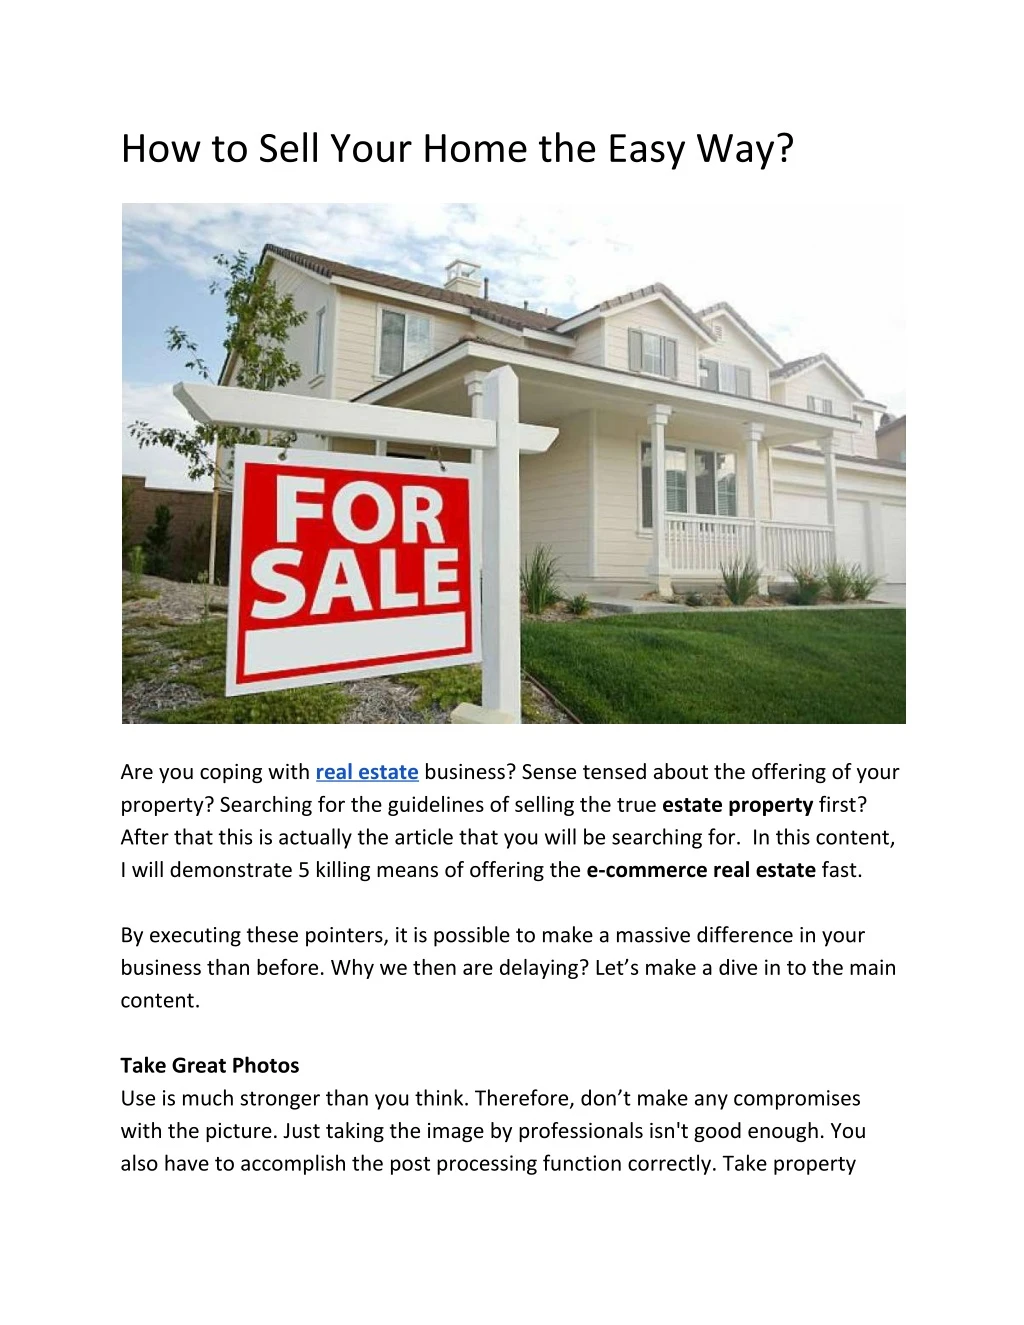 how to sell your home the easy way